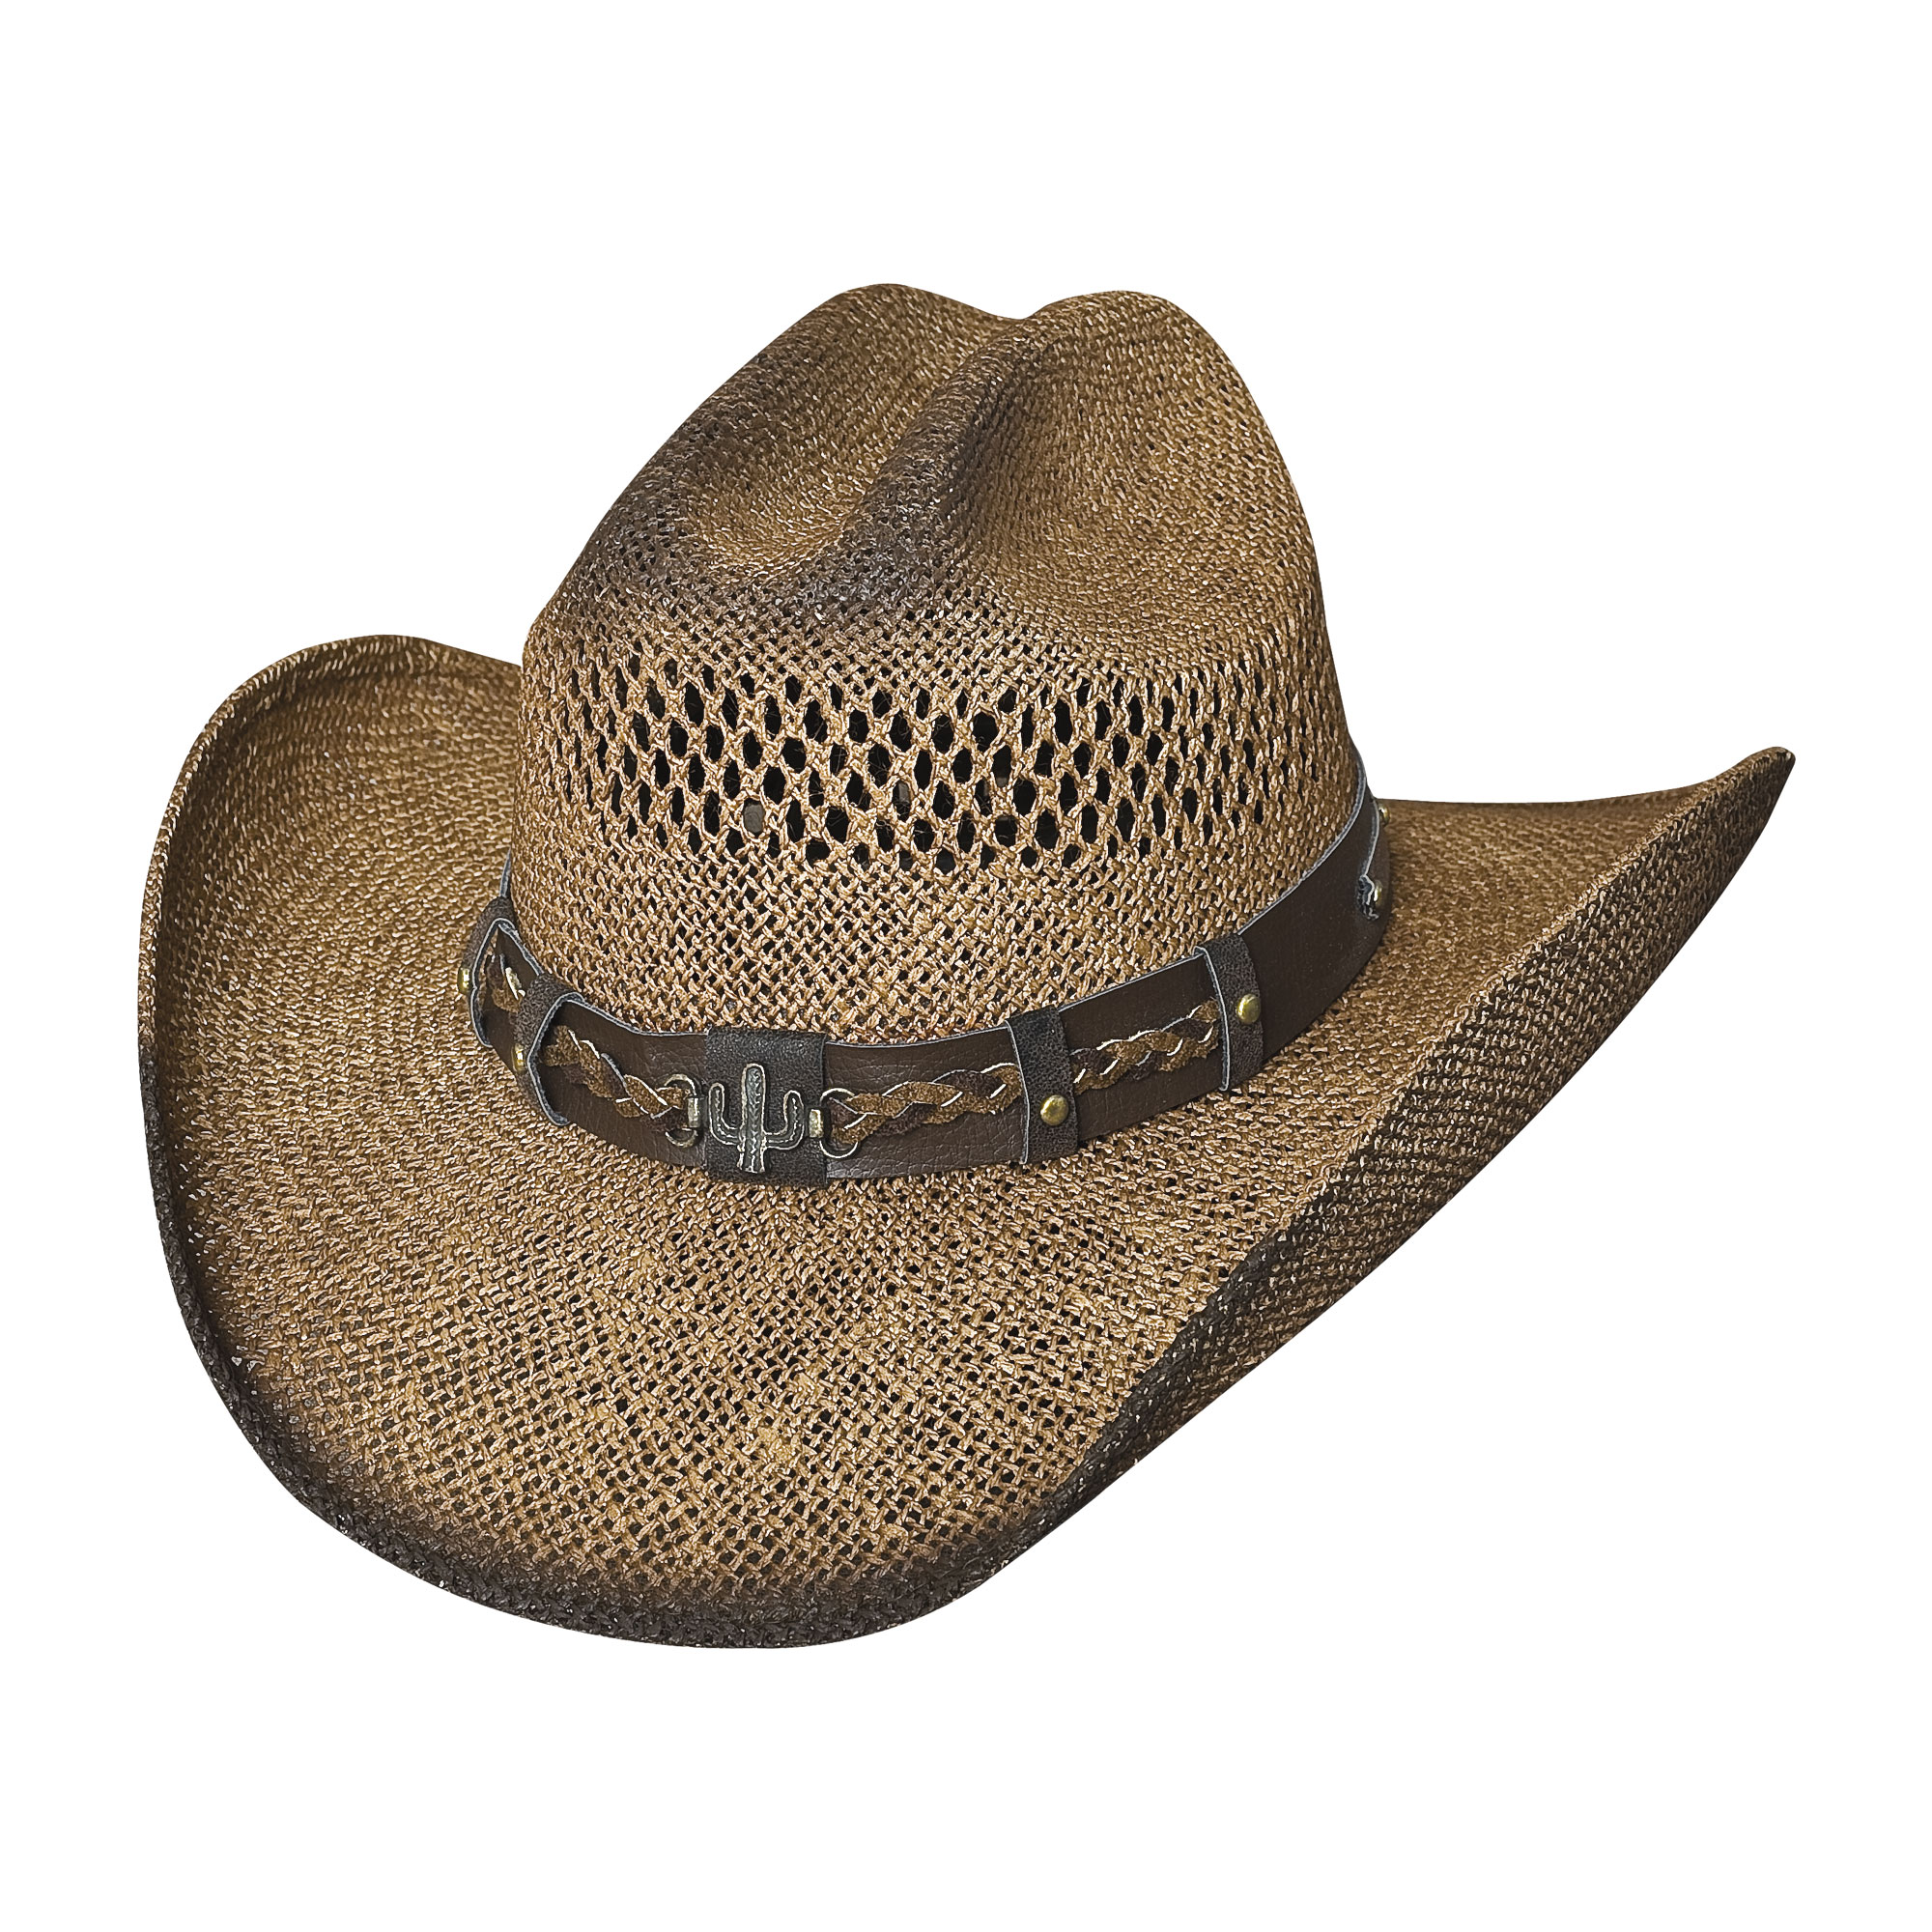 OUT OF THE RANGE | BULLHIDE HATS